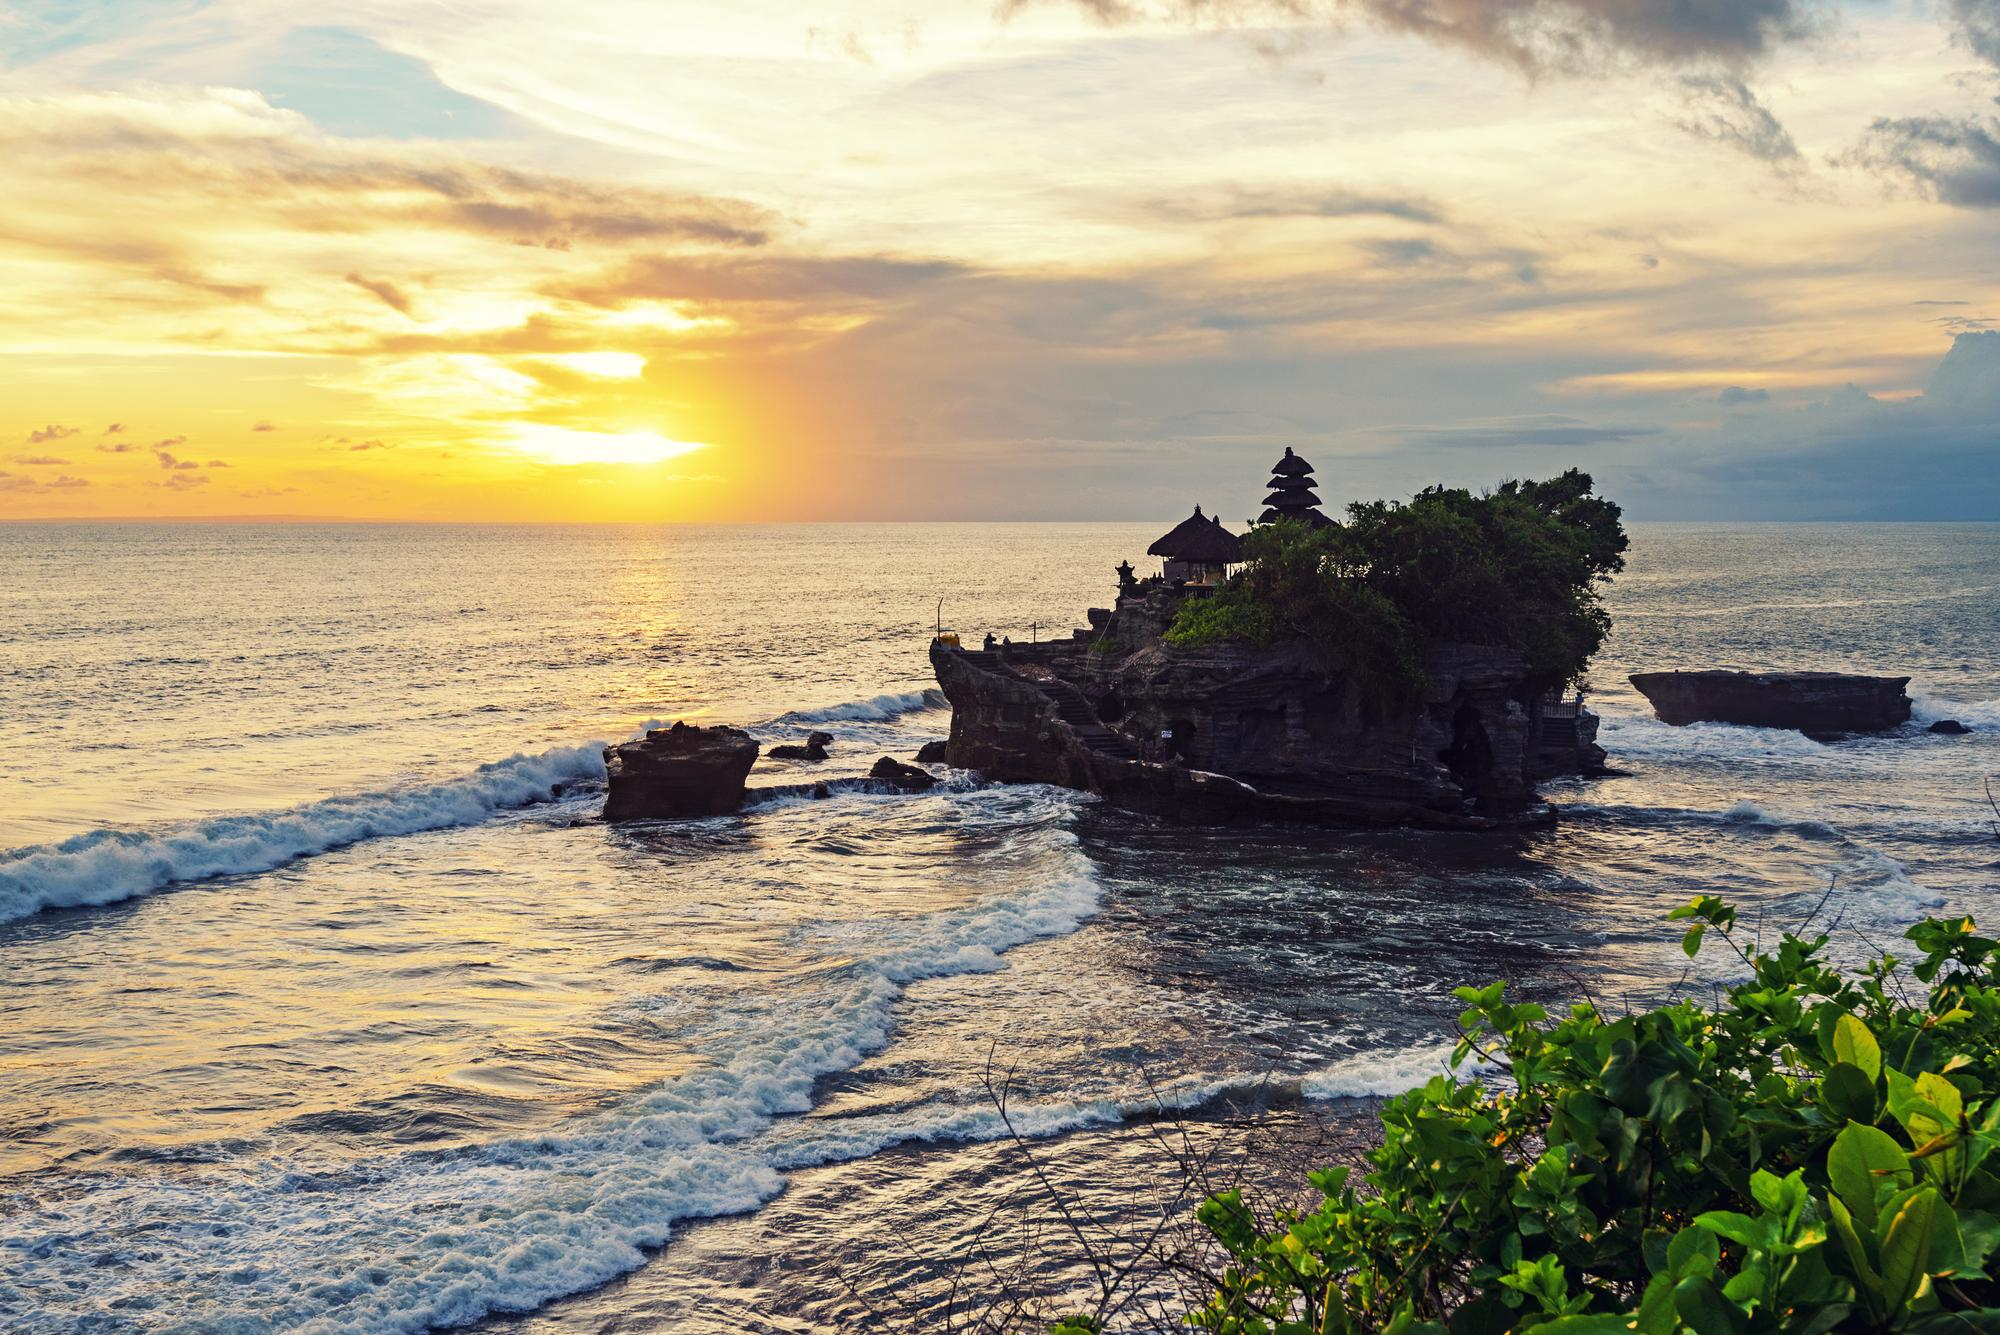 Why Is Tanah Lot Famous